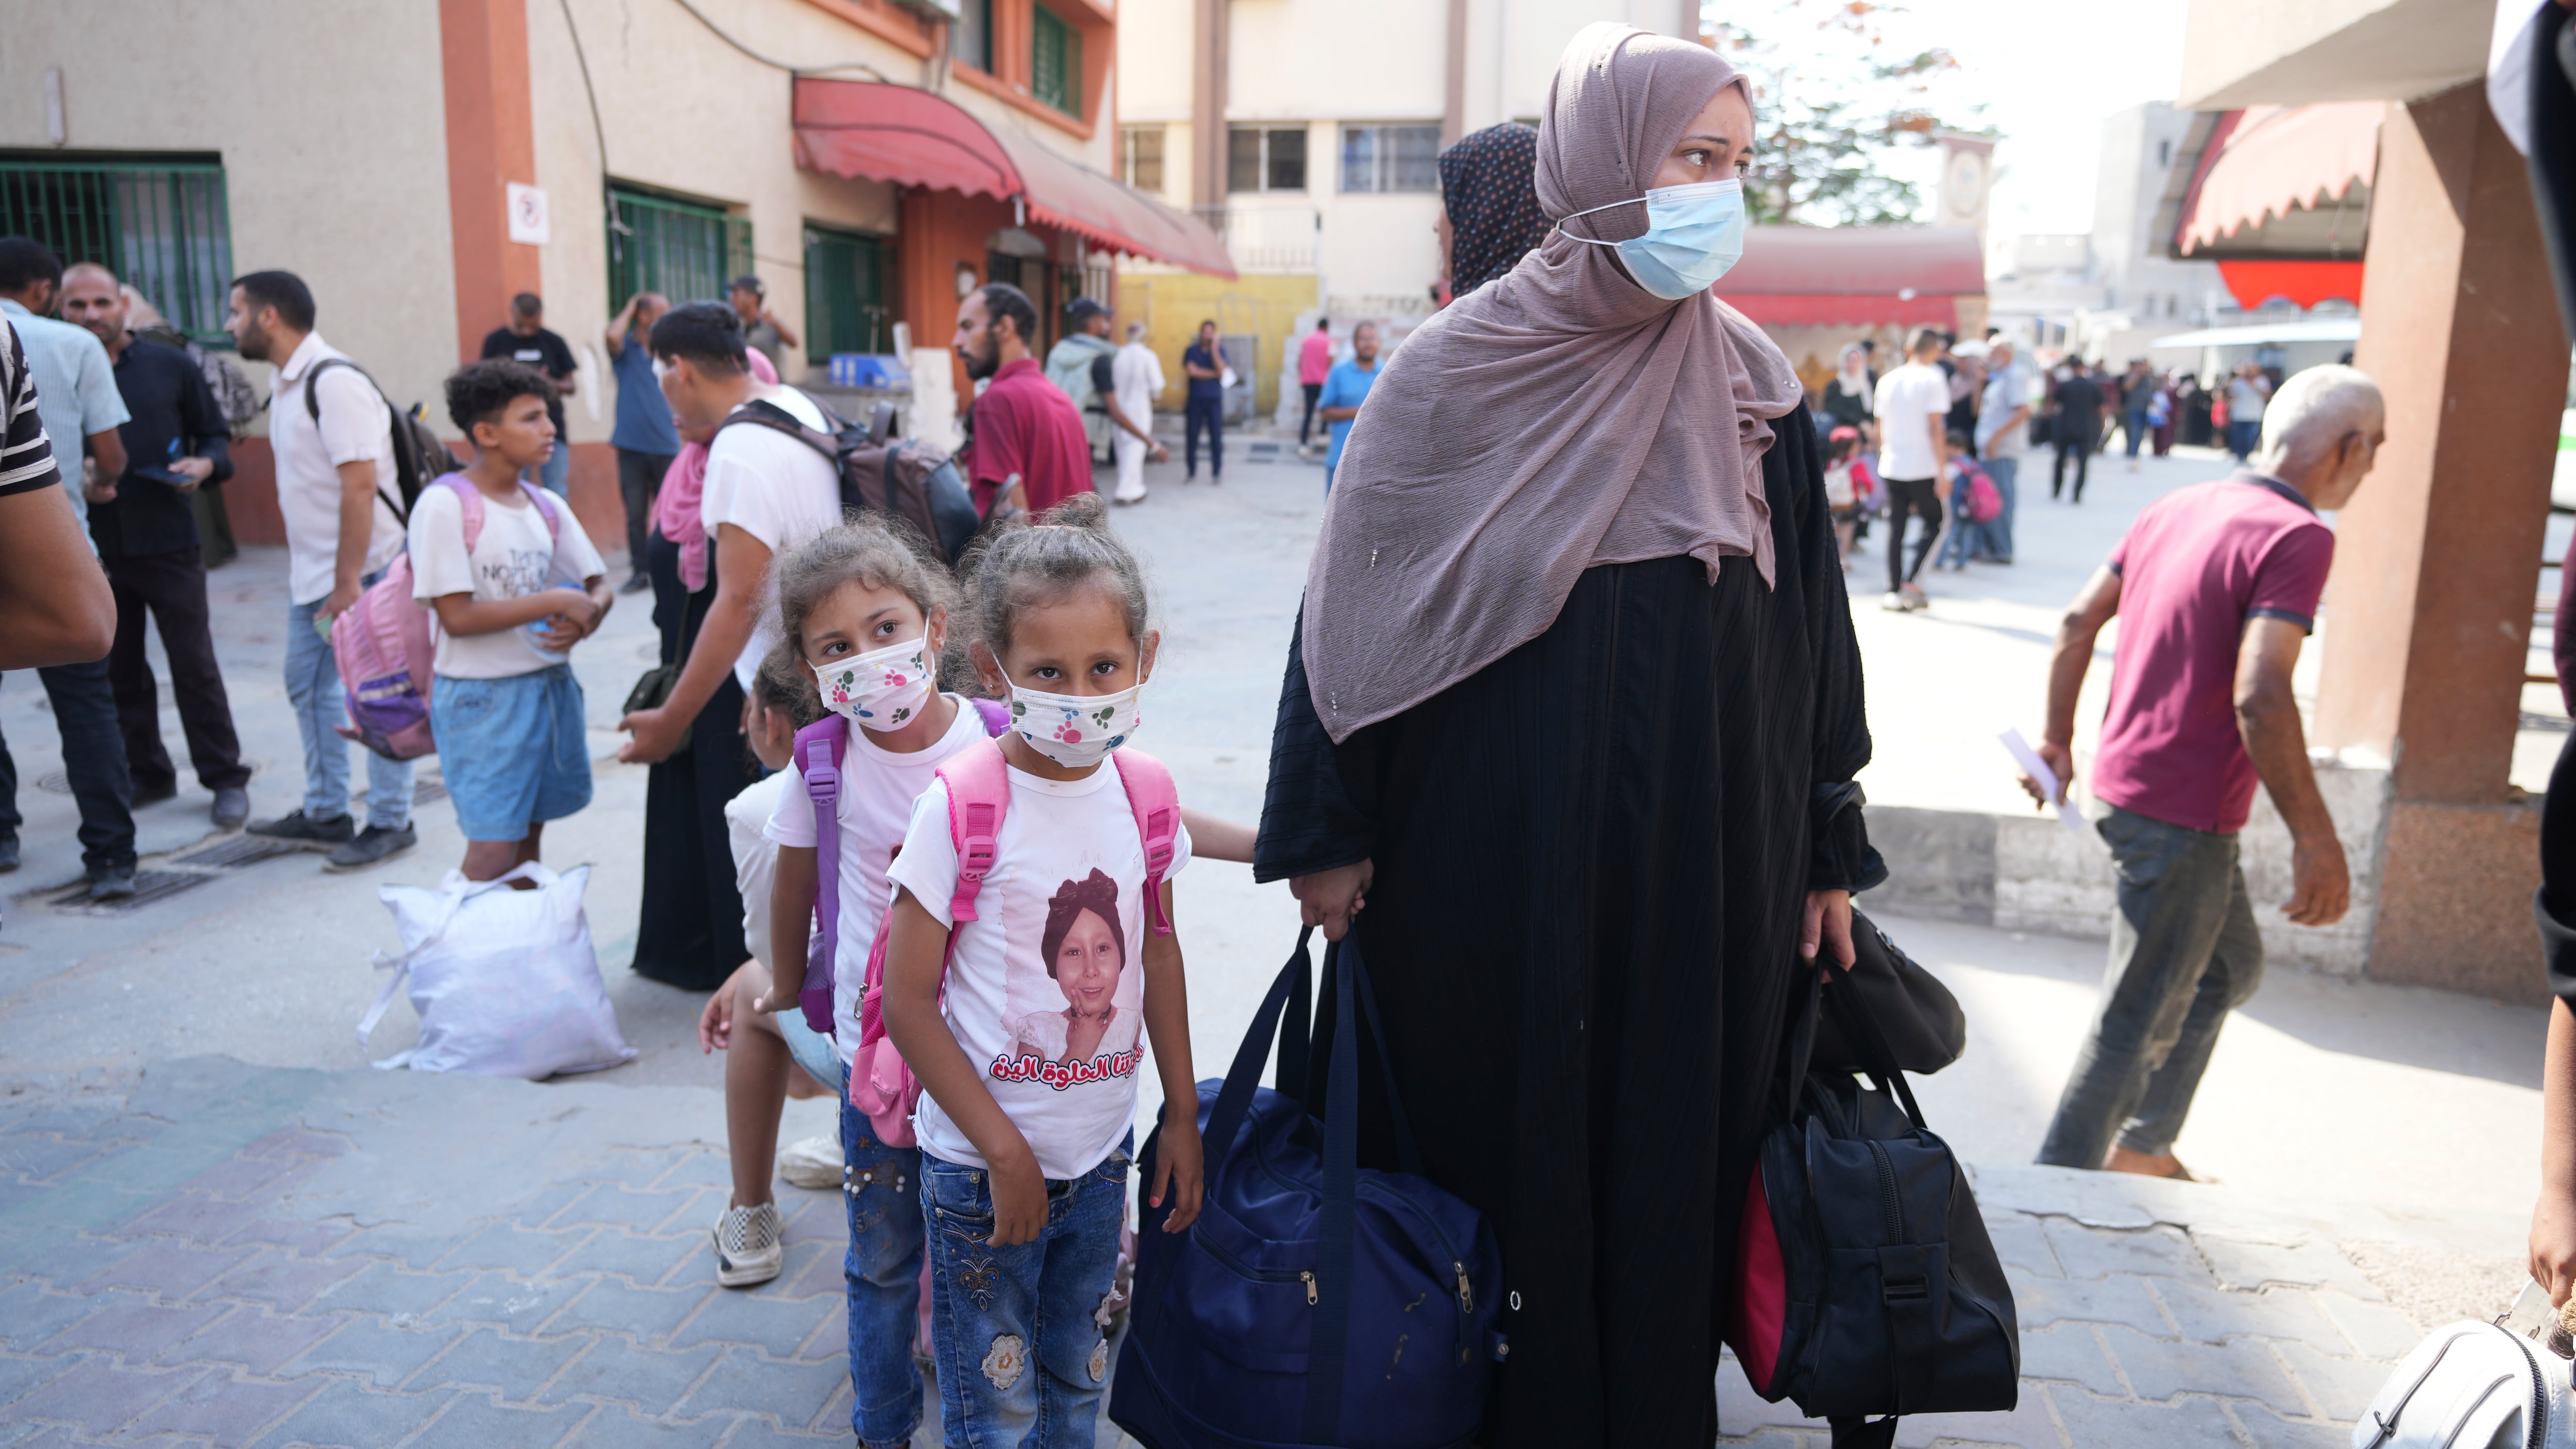 Palestinian children with chronic diseases stand next to their mother as they wait to leave the Gaza Strip (Abdel Kareem Hana/AP)